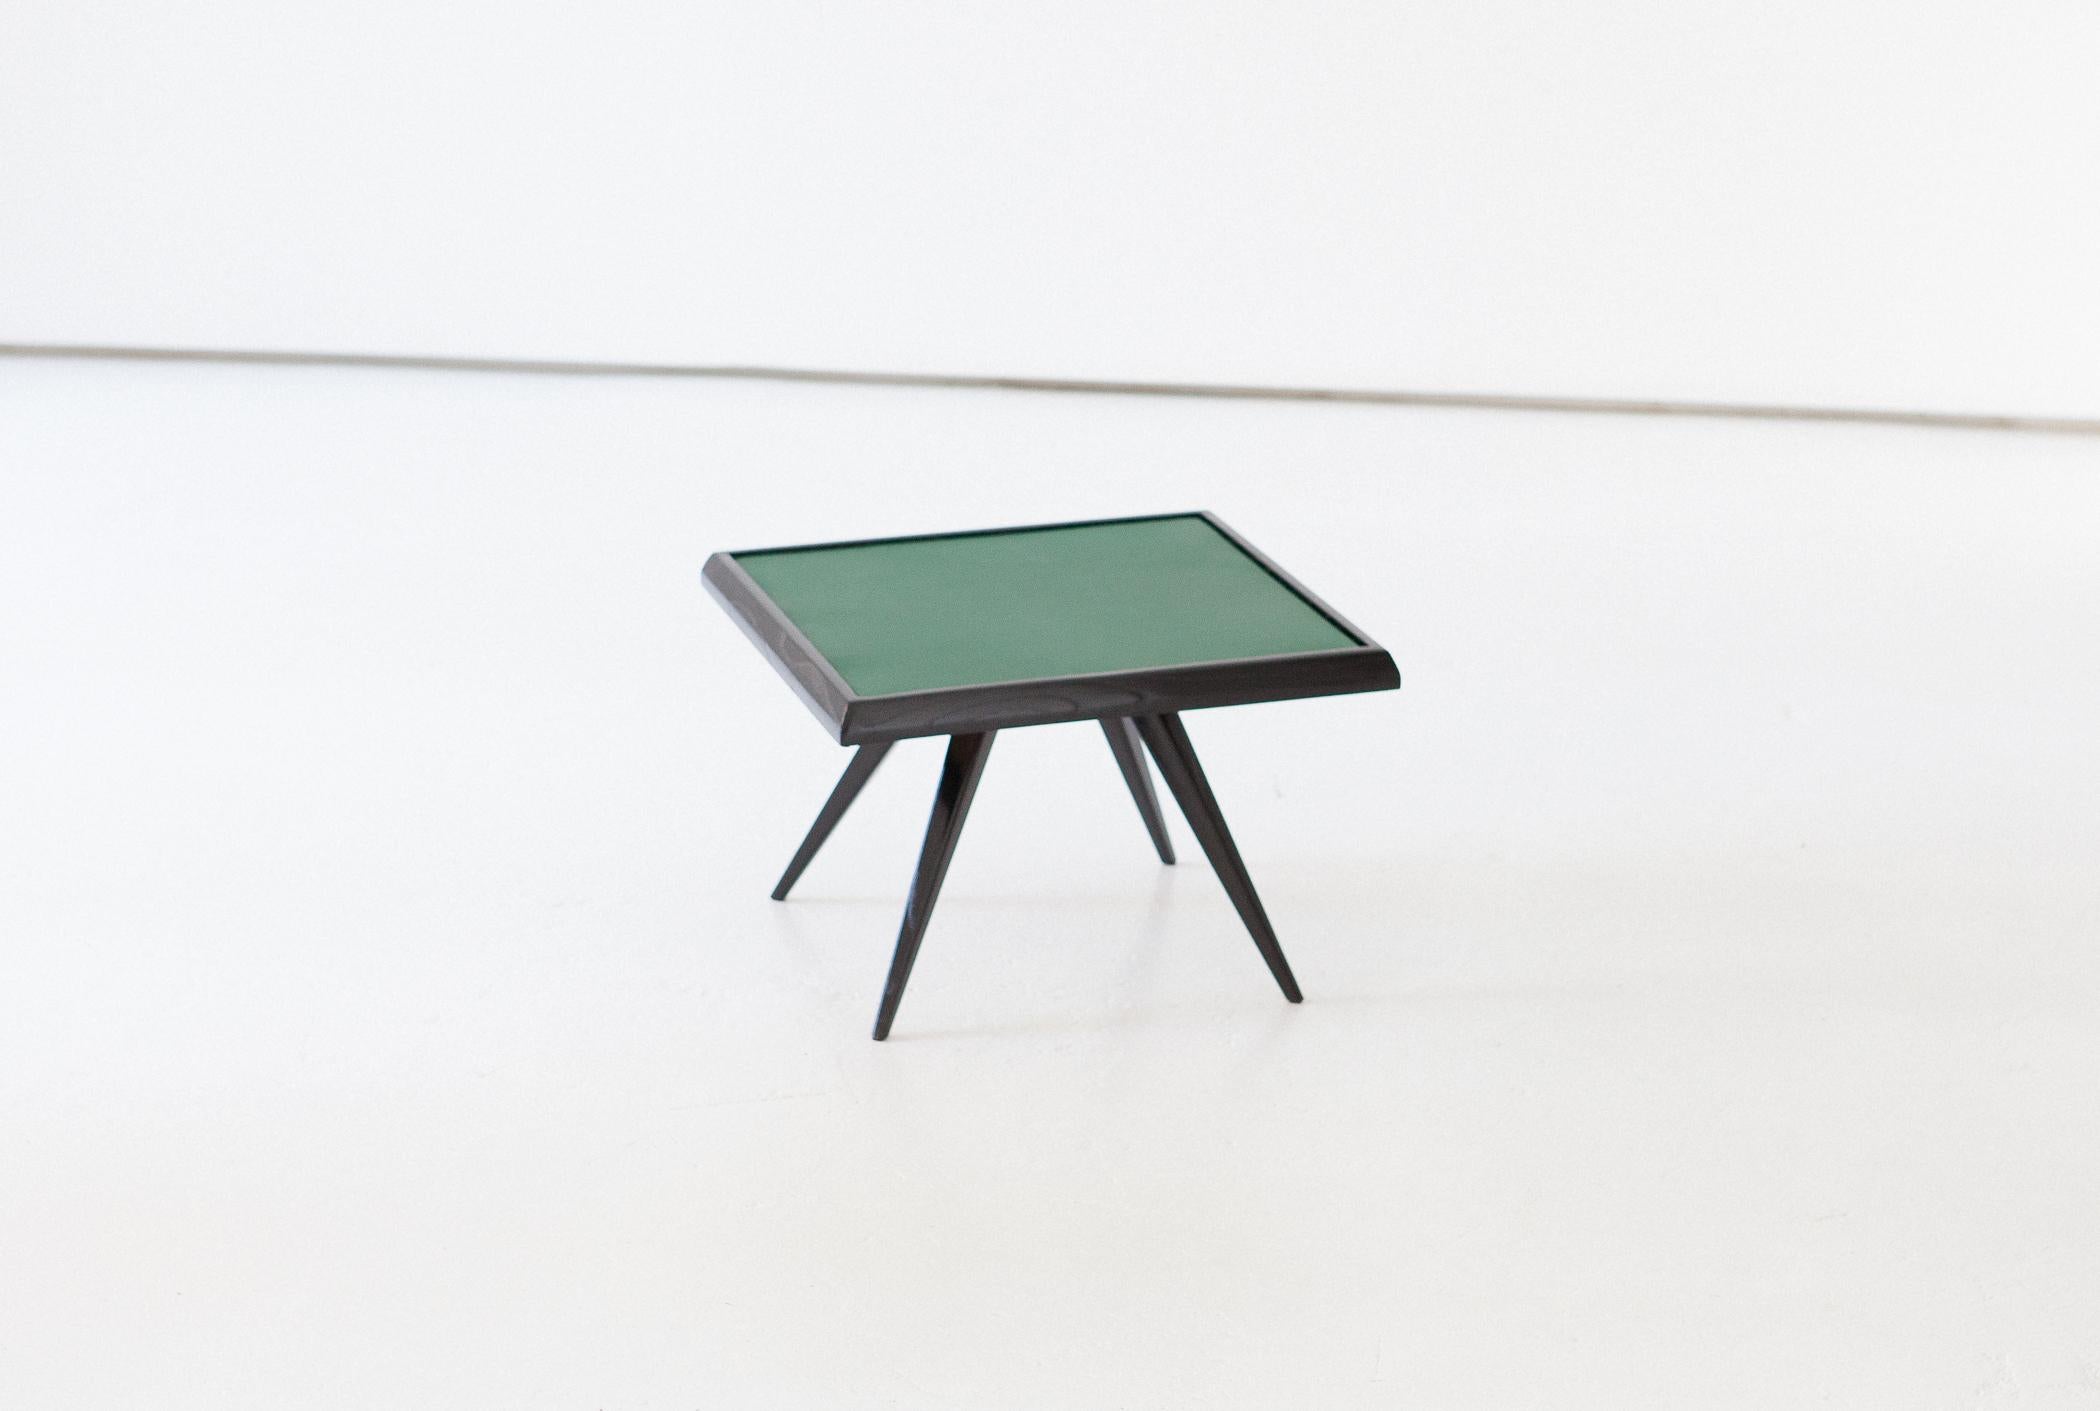 A sculptural and airy low table manufactured in Italy in the 1950s
Solid wood with natural green leather top.
Completely restored, hand polished with natural shellac, aniline black stained.

A Mid-Century Modern style side table.
   